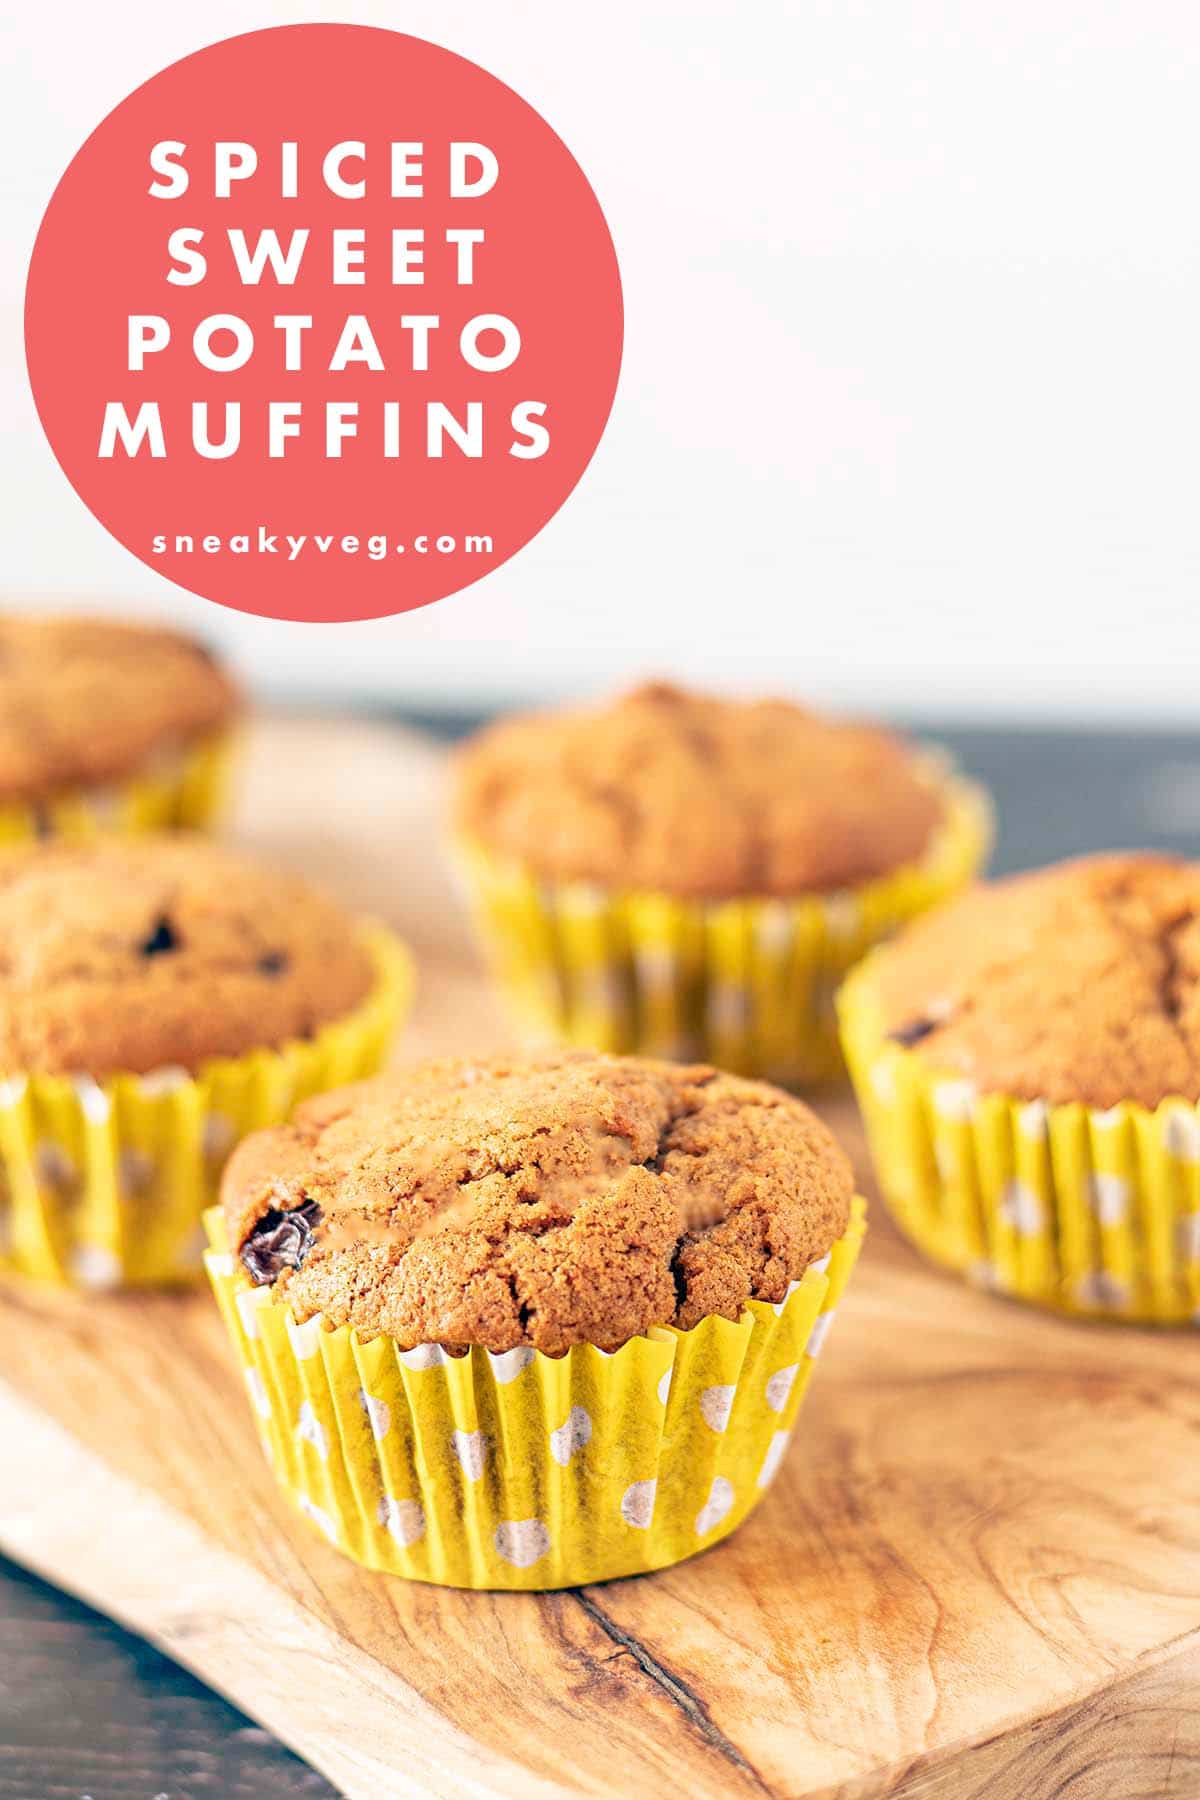 sweet potato muffins in yellow cases on board